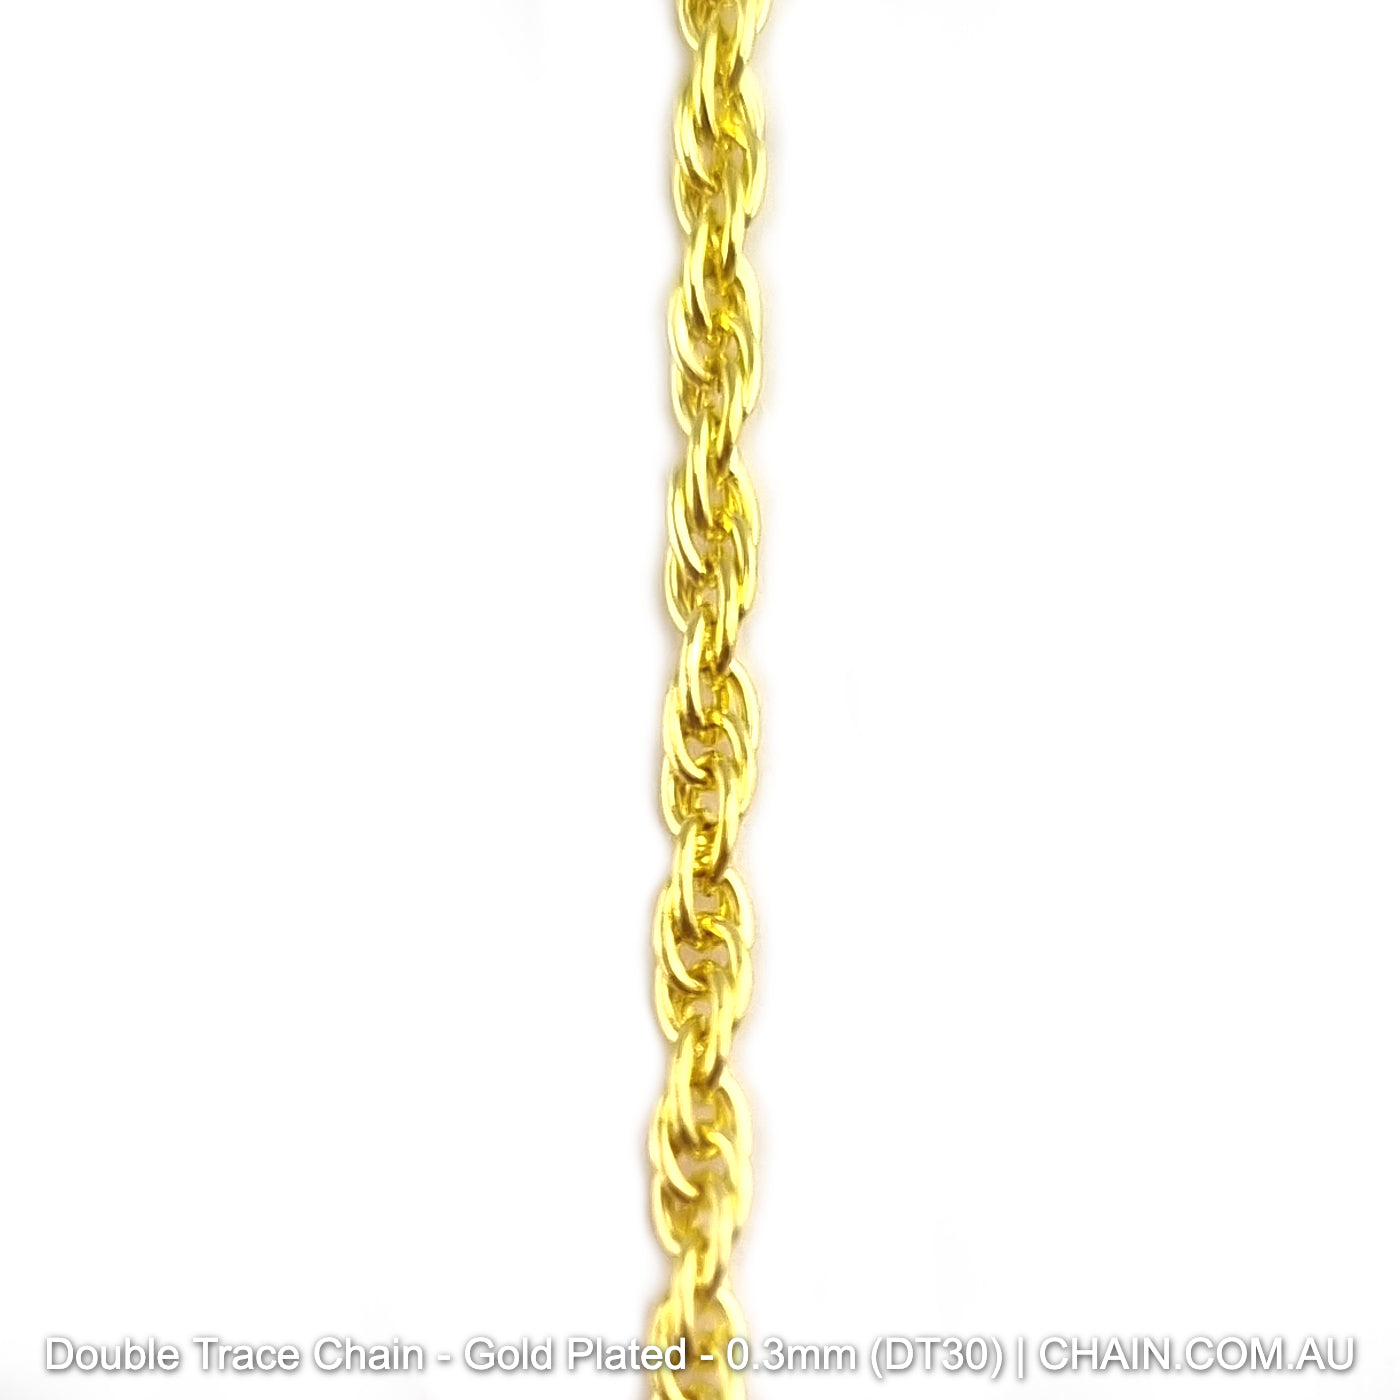 Double Trace Chain - Gold Plated. Size: 0.3mm (DT30), qty: 25-metres. Shop jewellery chain online. Australia wide shipping. Chain.com.au